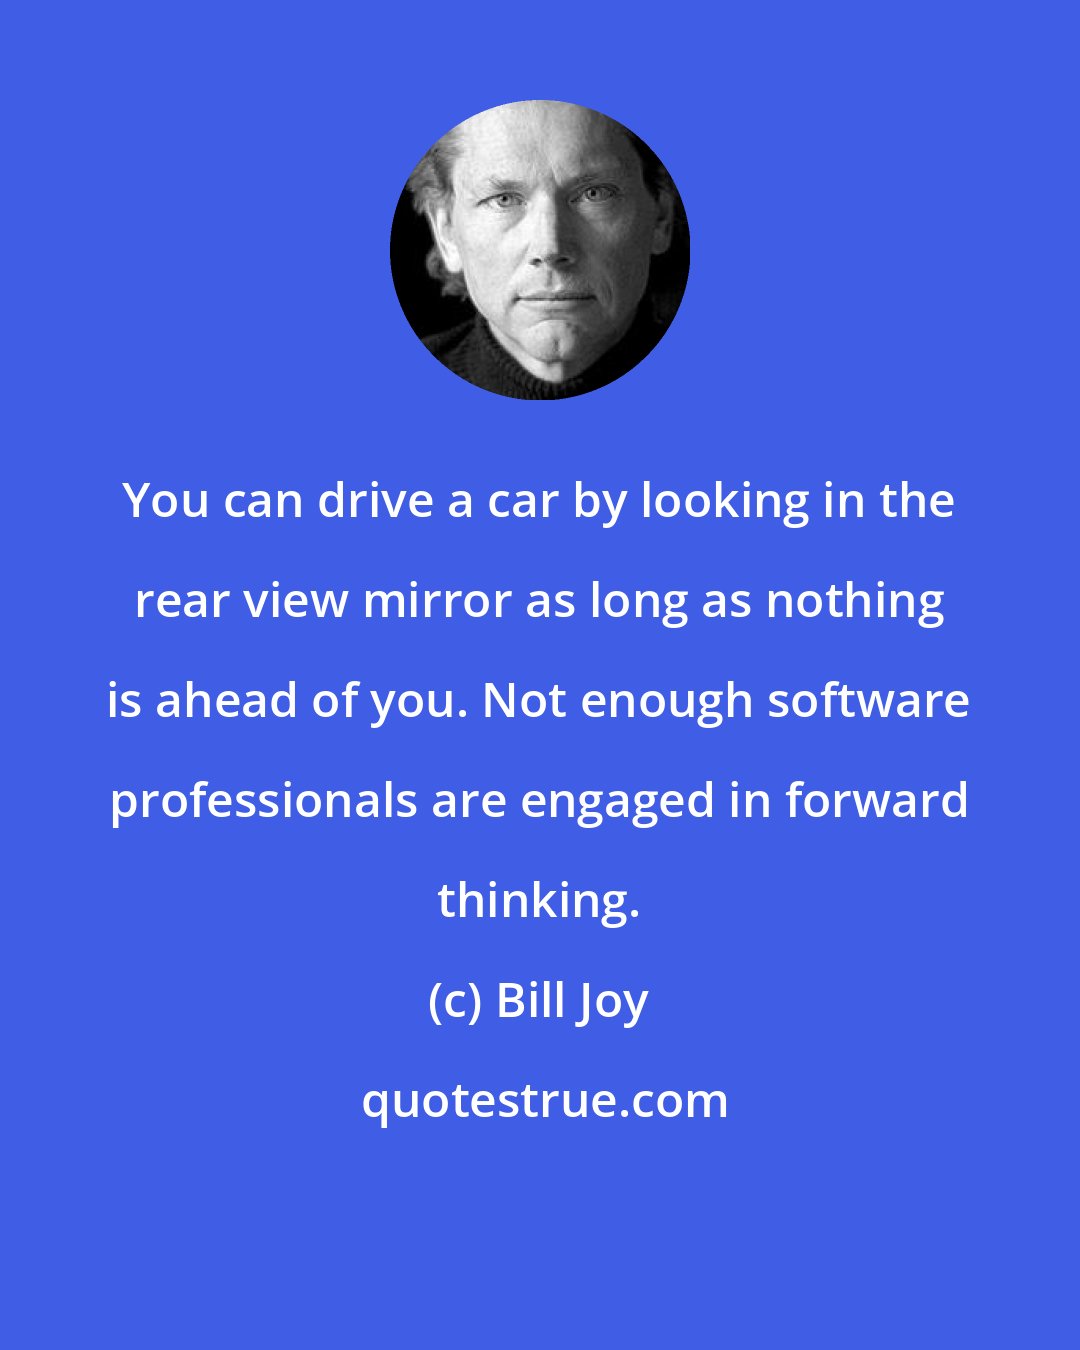 Bill Joy: You can drive a car by looking in the rear view mirror as long as nothing is ahead of you. Not enough software professionals are engaged in forward thinking.